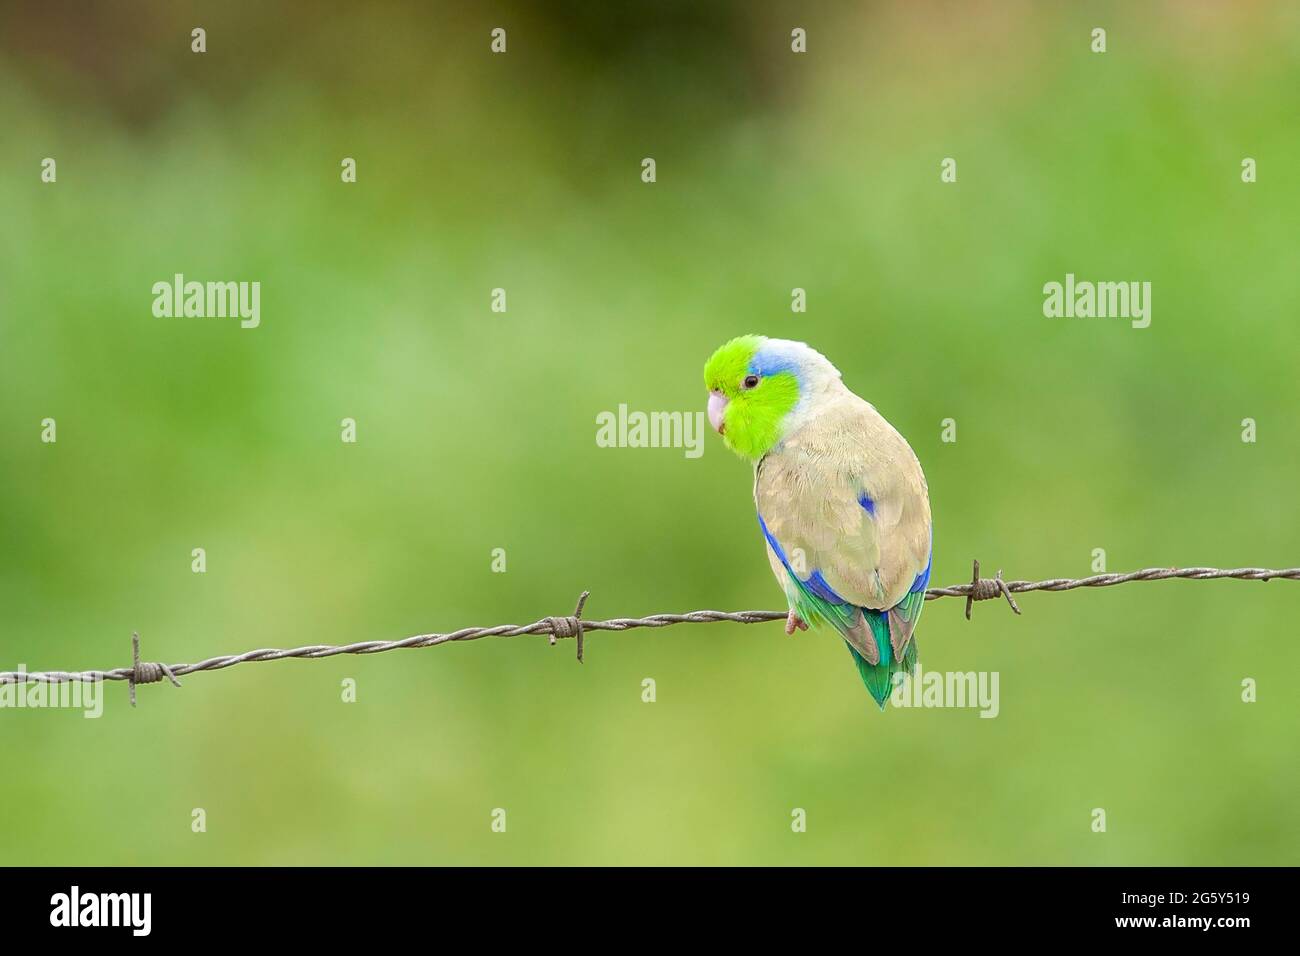 Pacific parrotlet, Forpus colestis, single bird perched on barbed wire fence, Manta, Ecuador Stock Photo